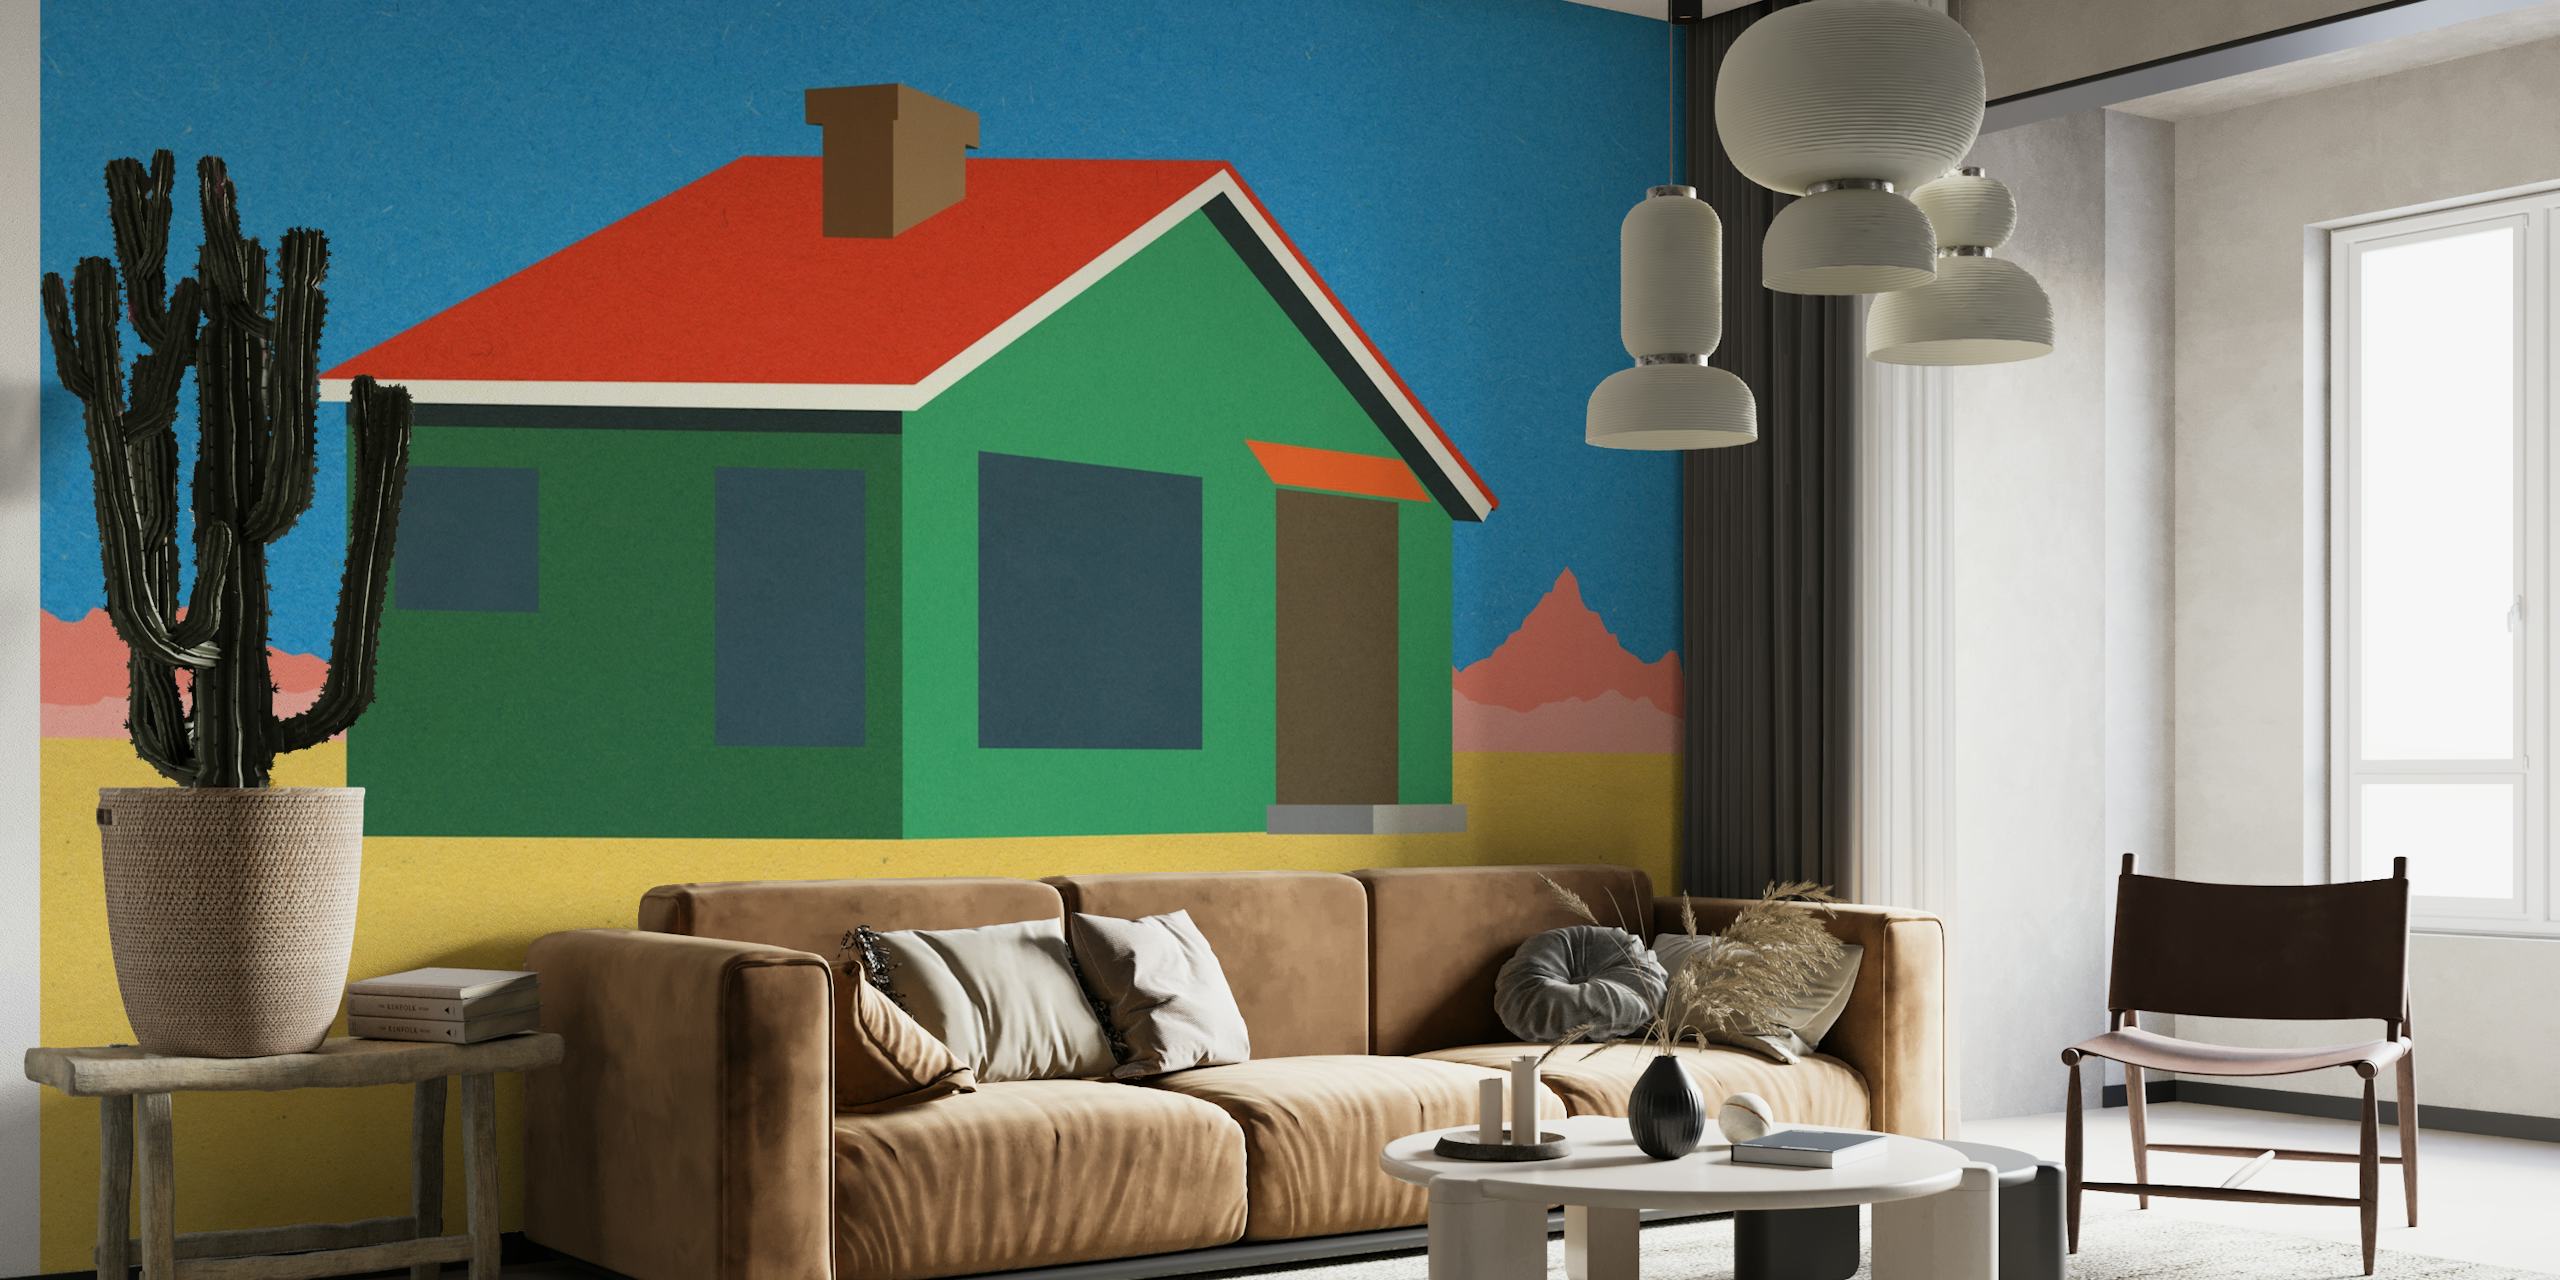 Stylized Joshua Tree desert house wall mural with vibrant colors